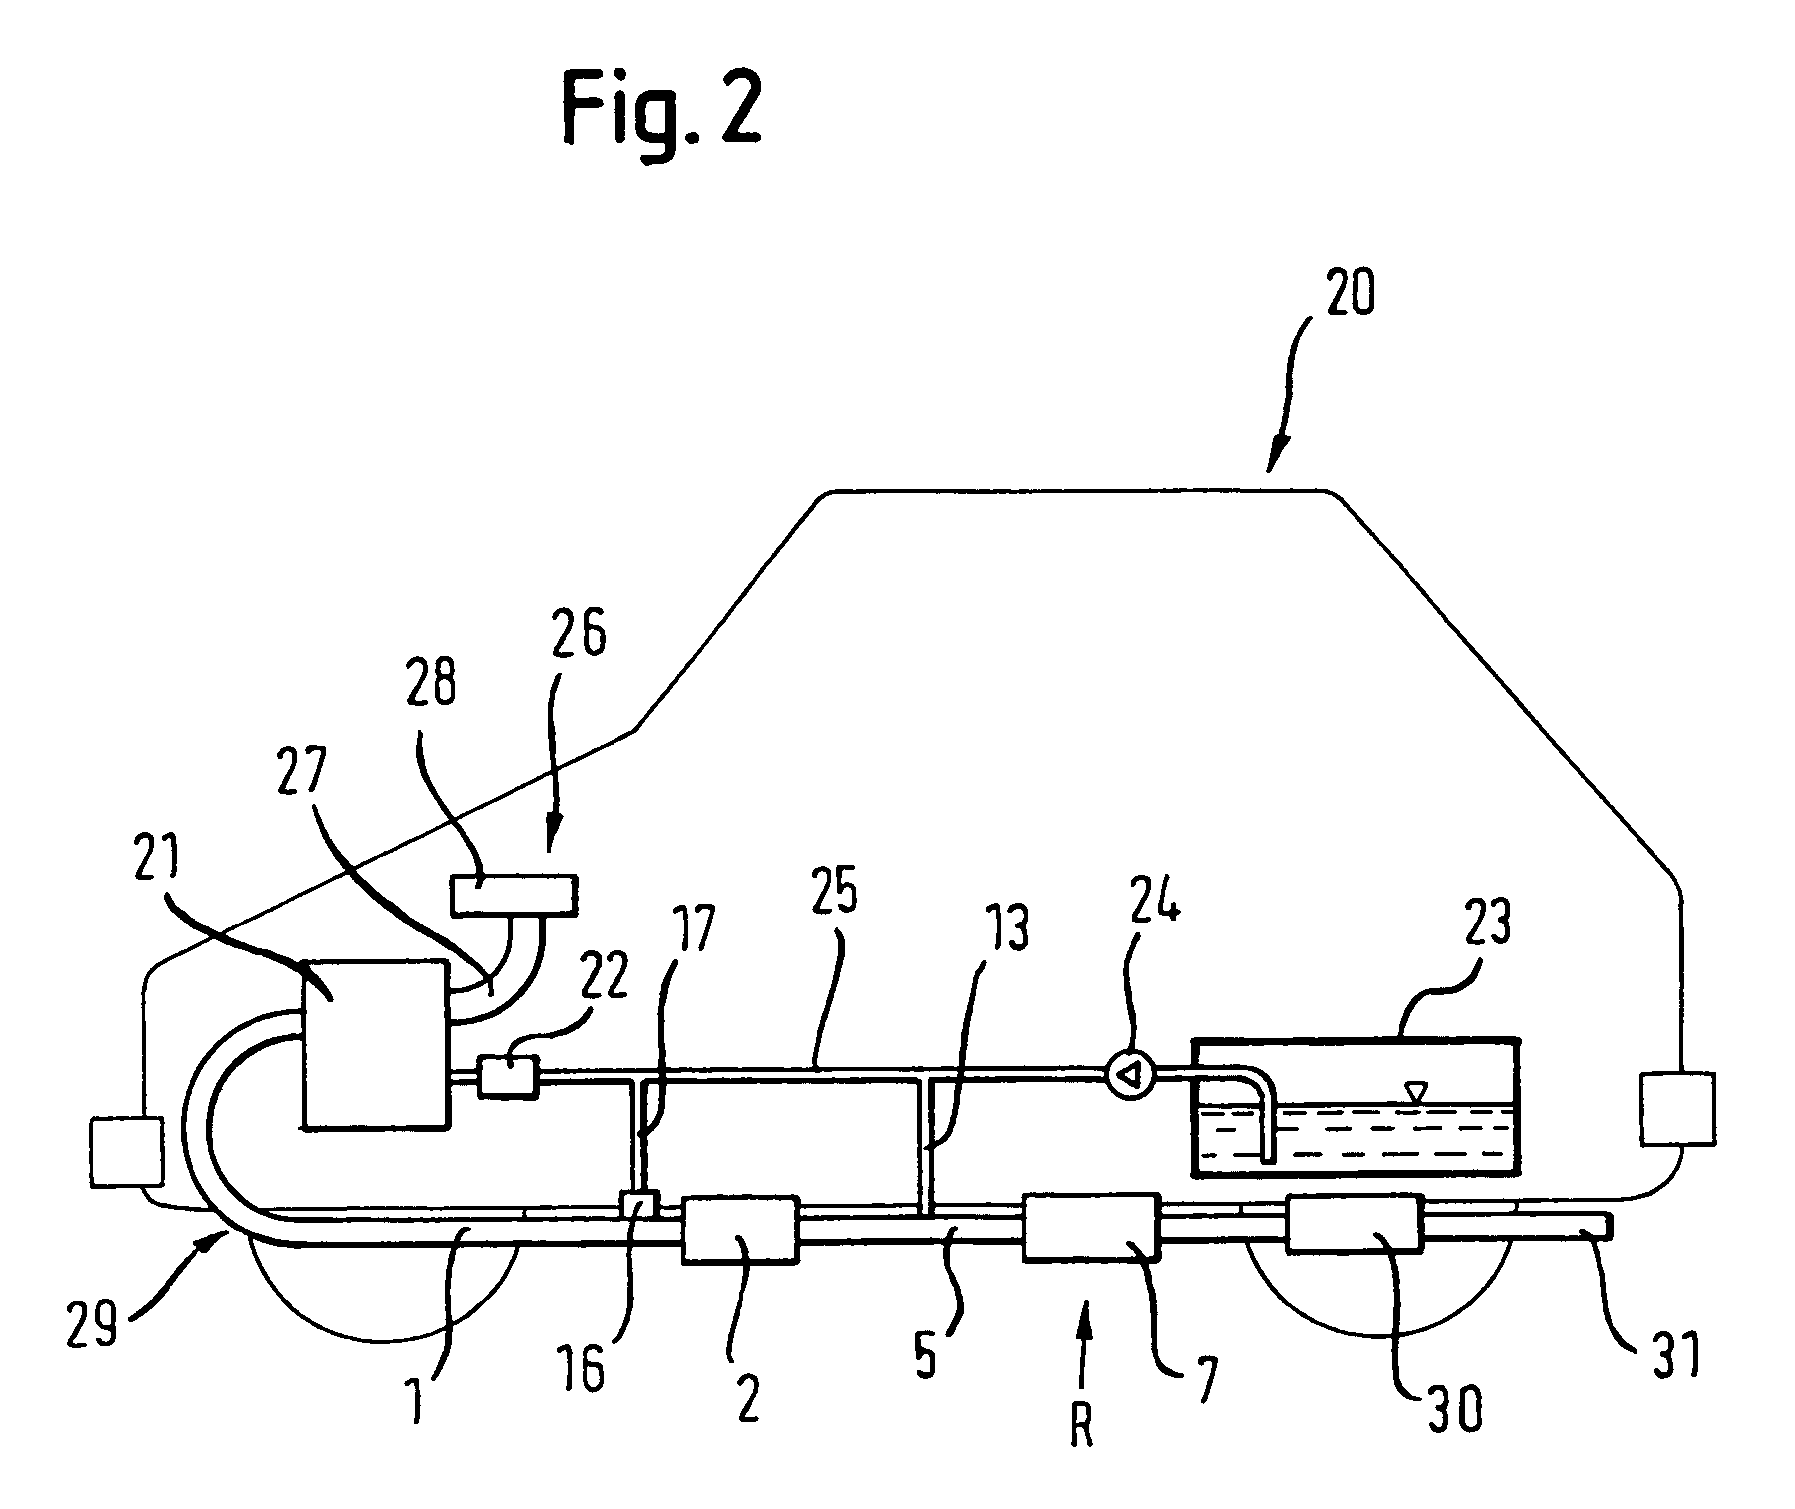 Motor vehicle provided with a diesel propulsion engine